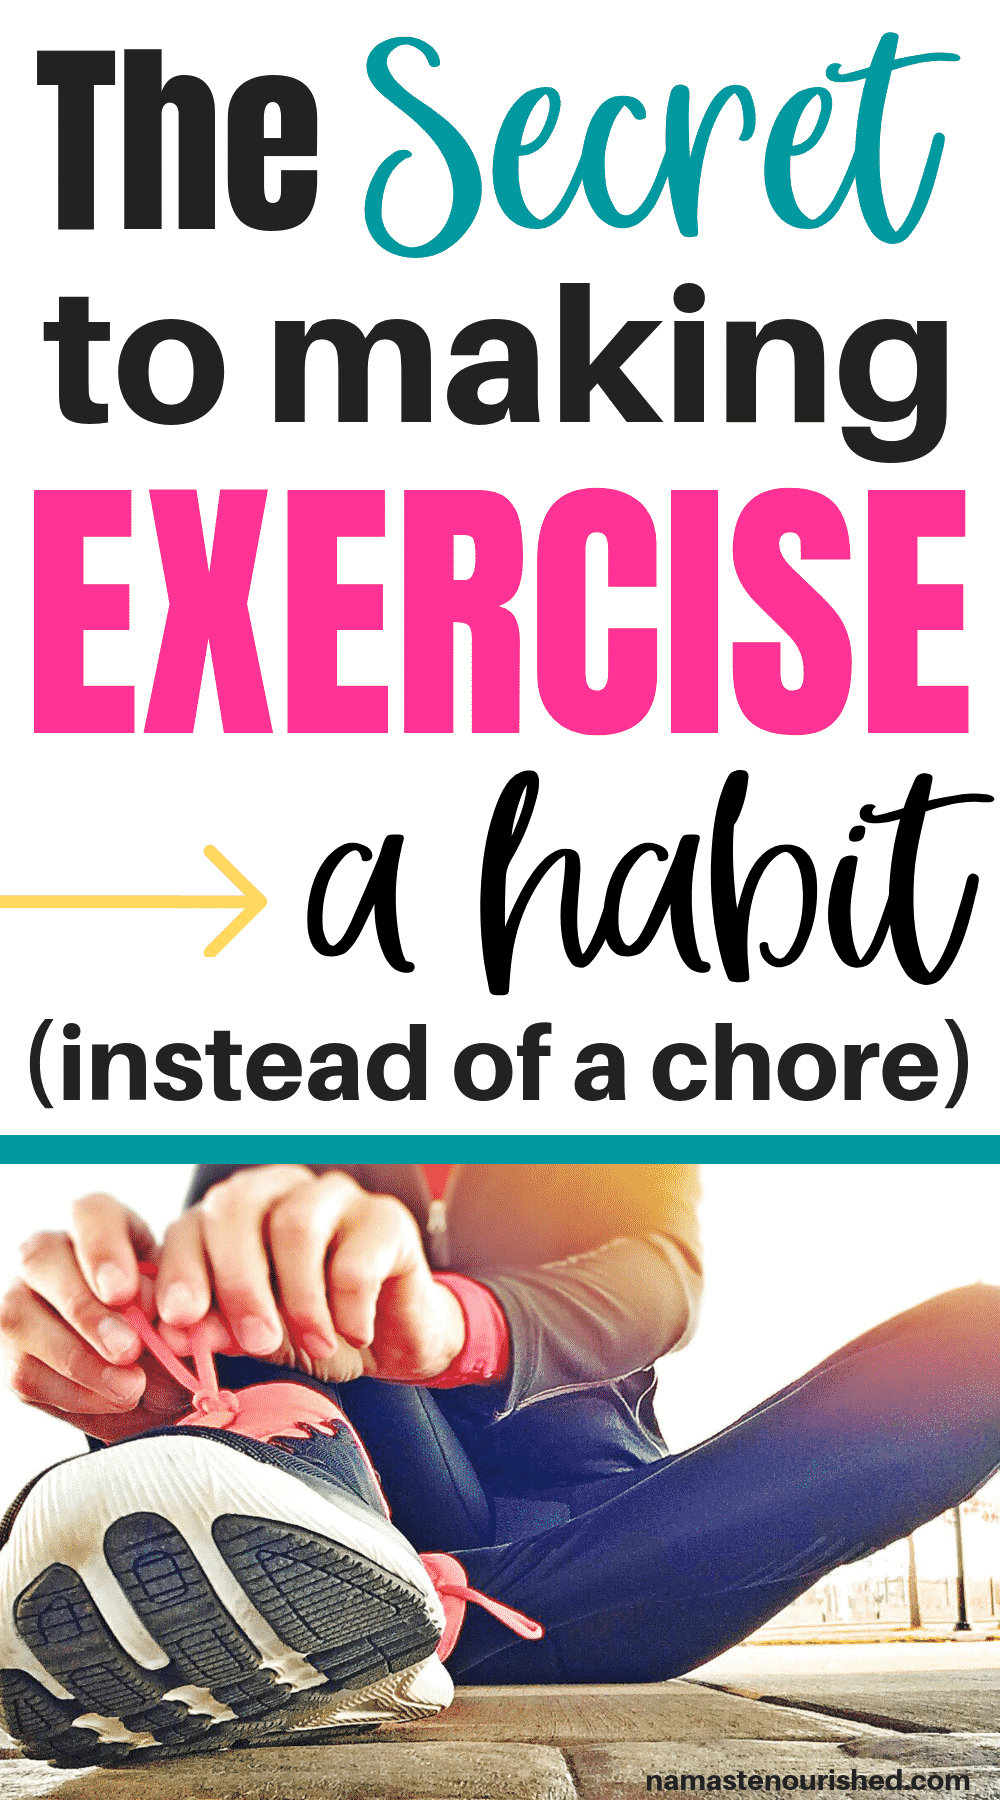 How to make exercise a habit instead of a chore (the secret is actually simple!) == srcset=